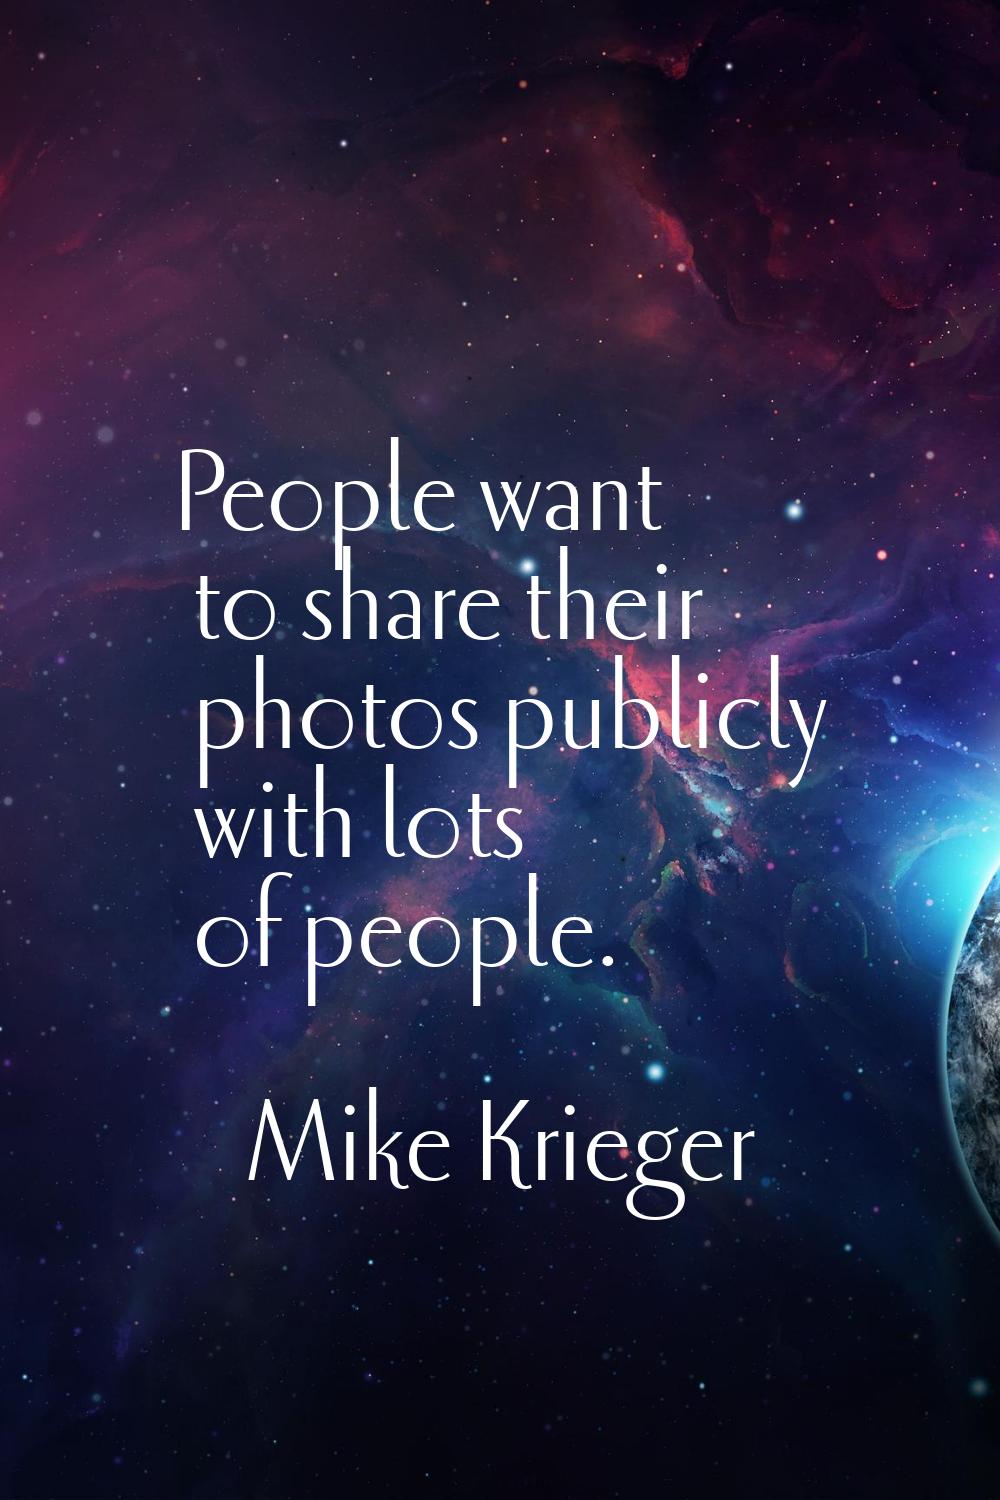 People want to share their photos publicly with lots of people.